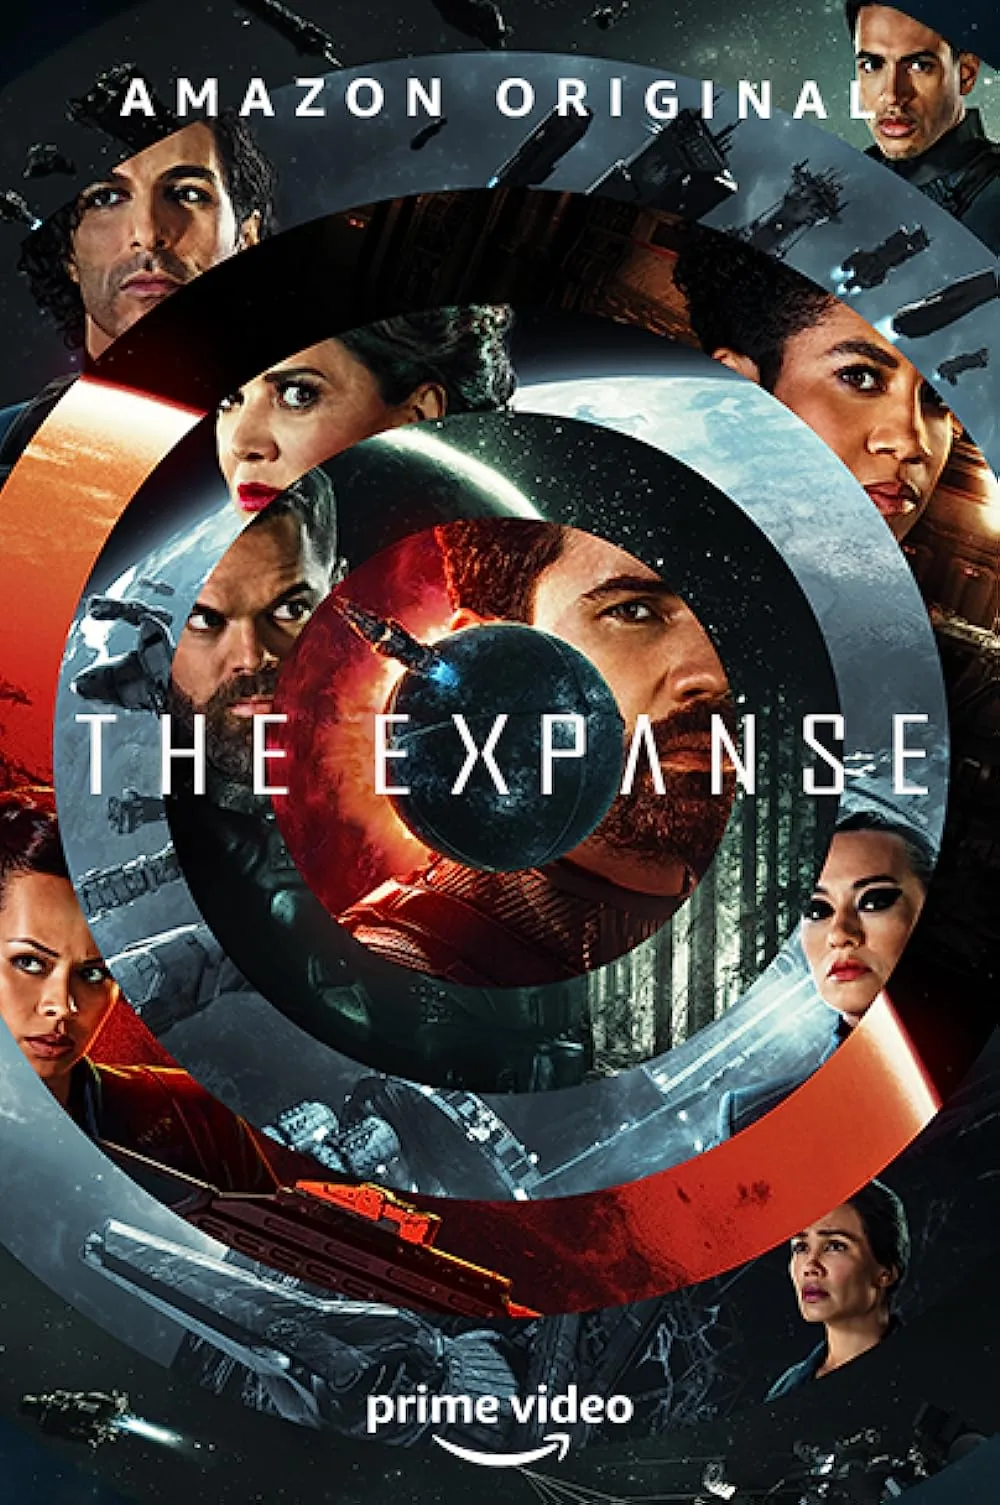 What Is The Expanse About?